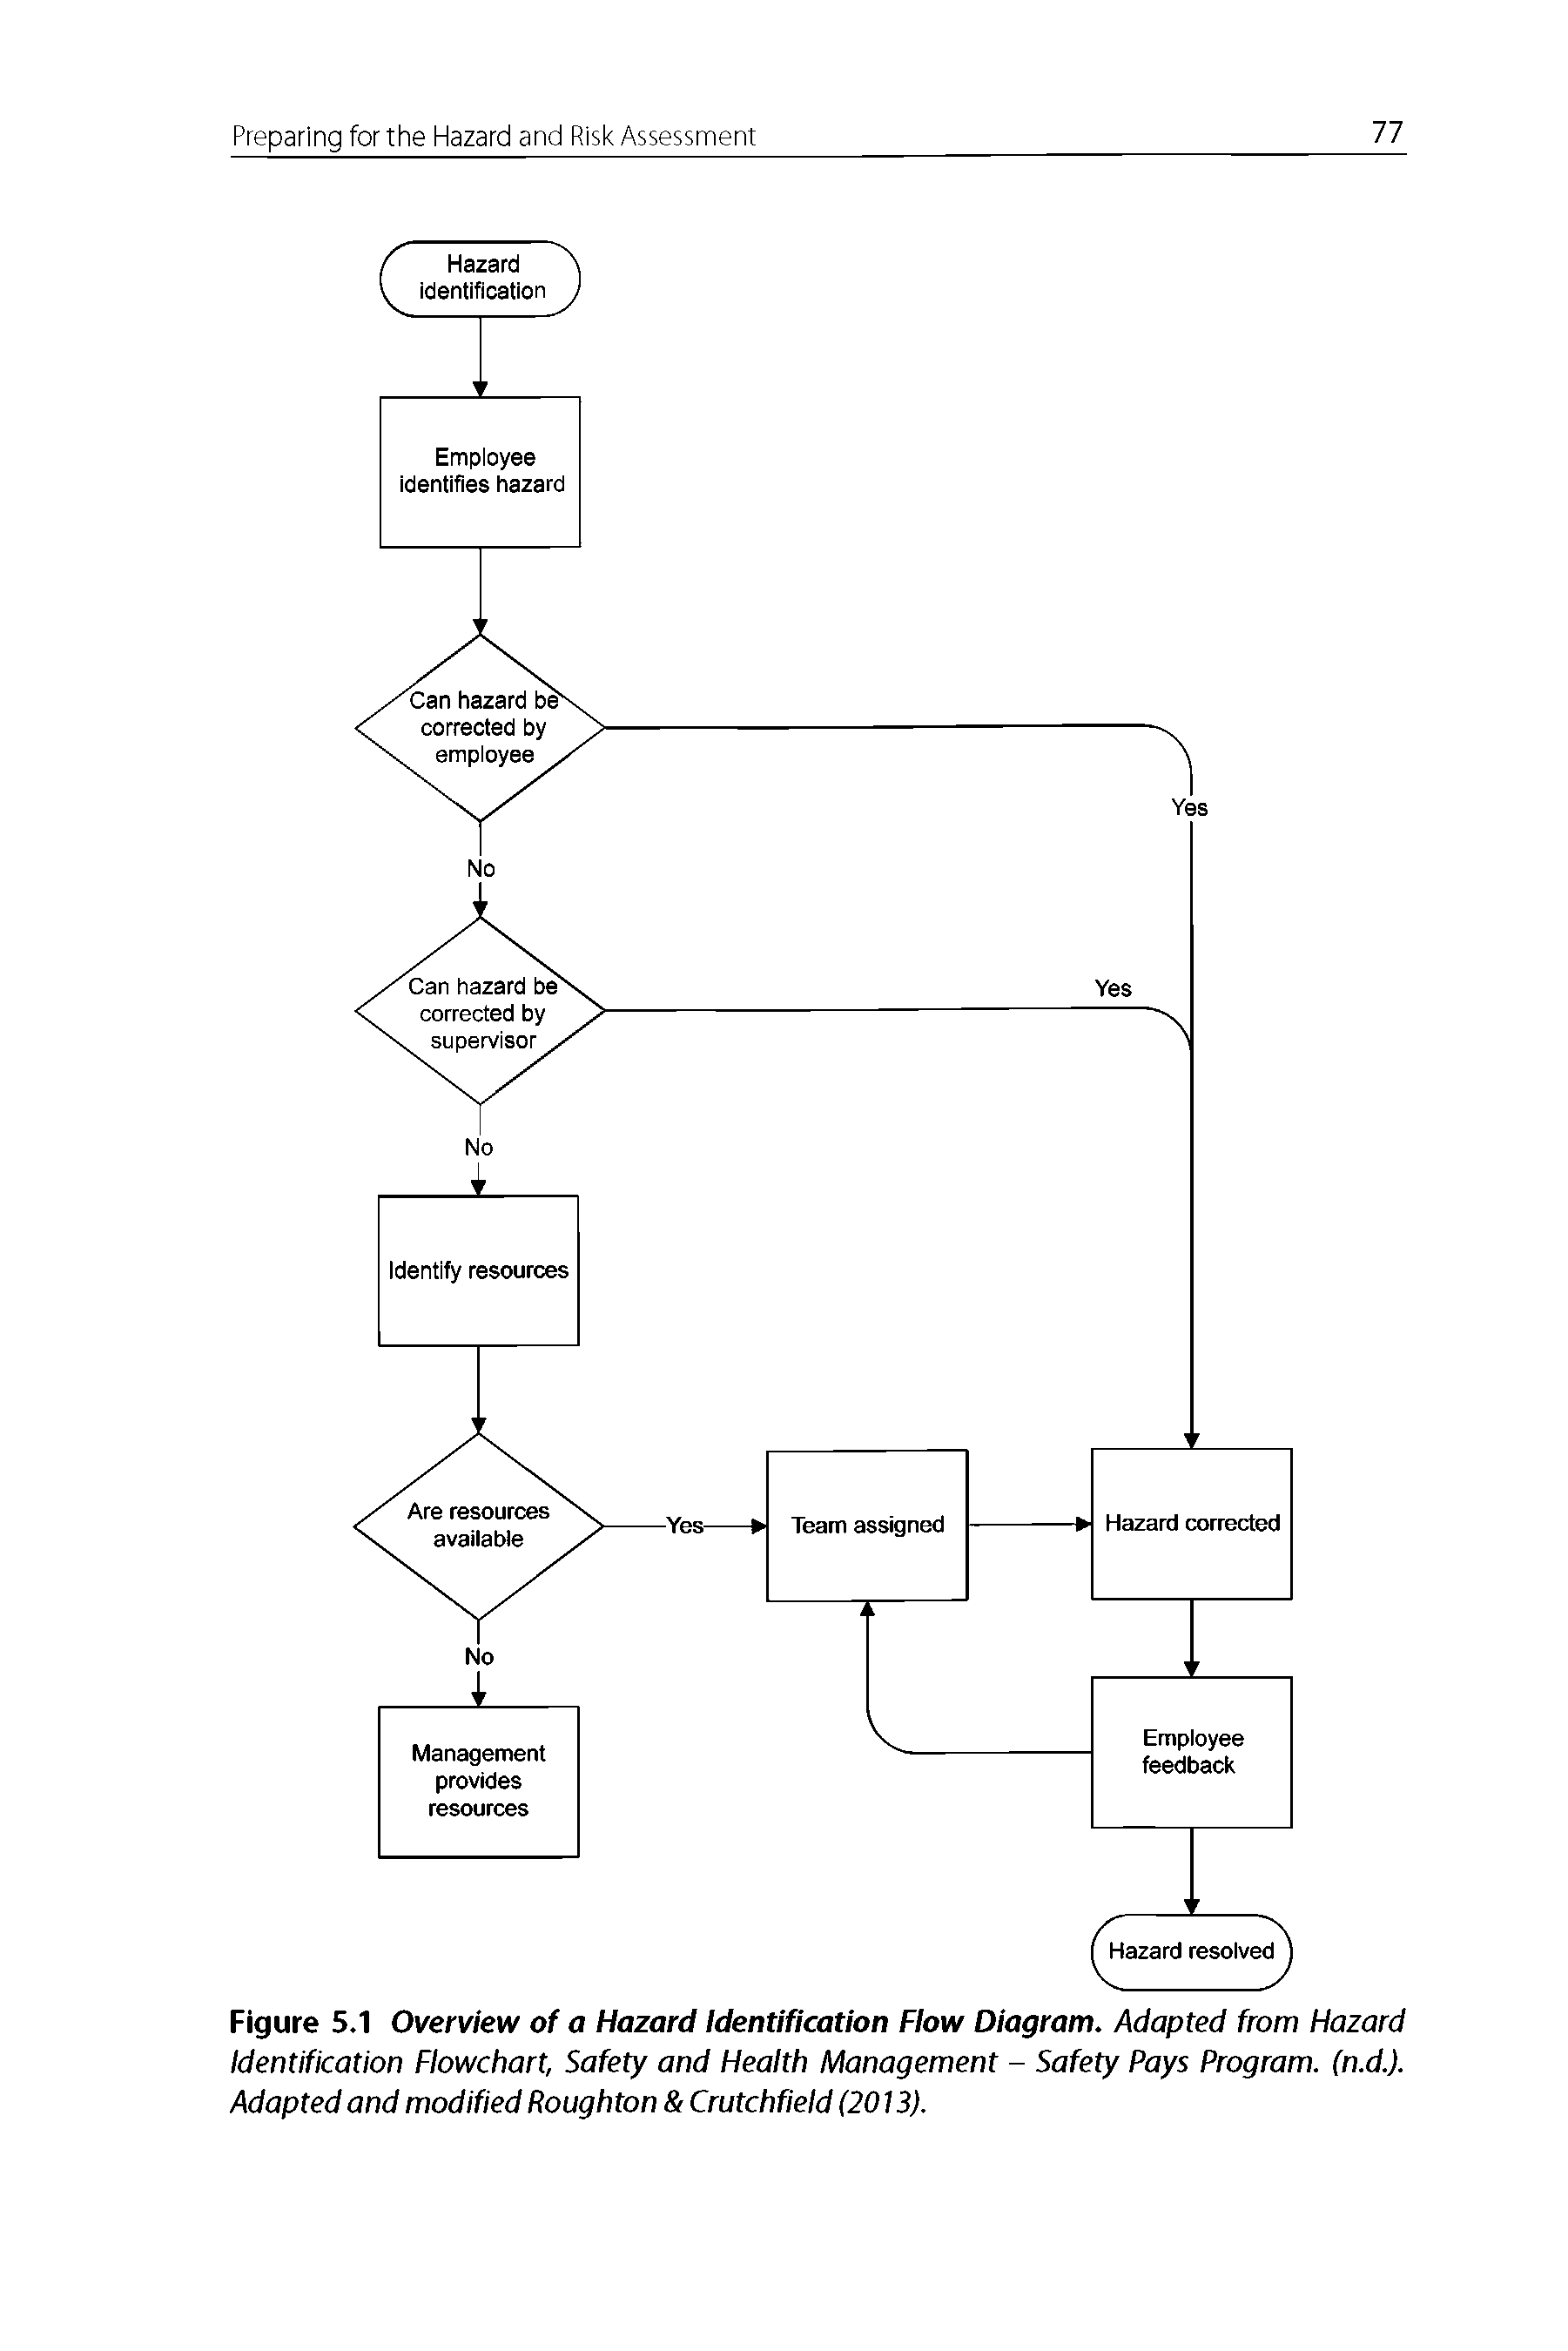 Figure 5.1 Overview of a Hazard Identification Flow Diagram. Adapted from Hazard Identification Flowchart, Safety and Health Management - Safety Pays Program, (n.d.). Adapted and modified Roughton Crutchfield (2013).